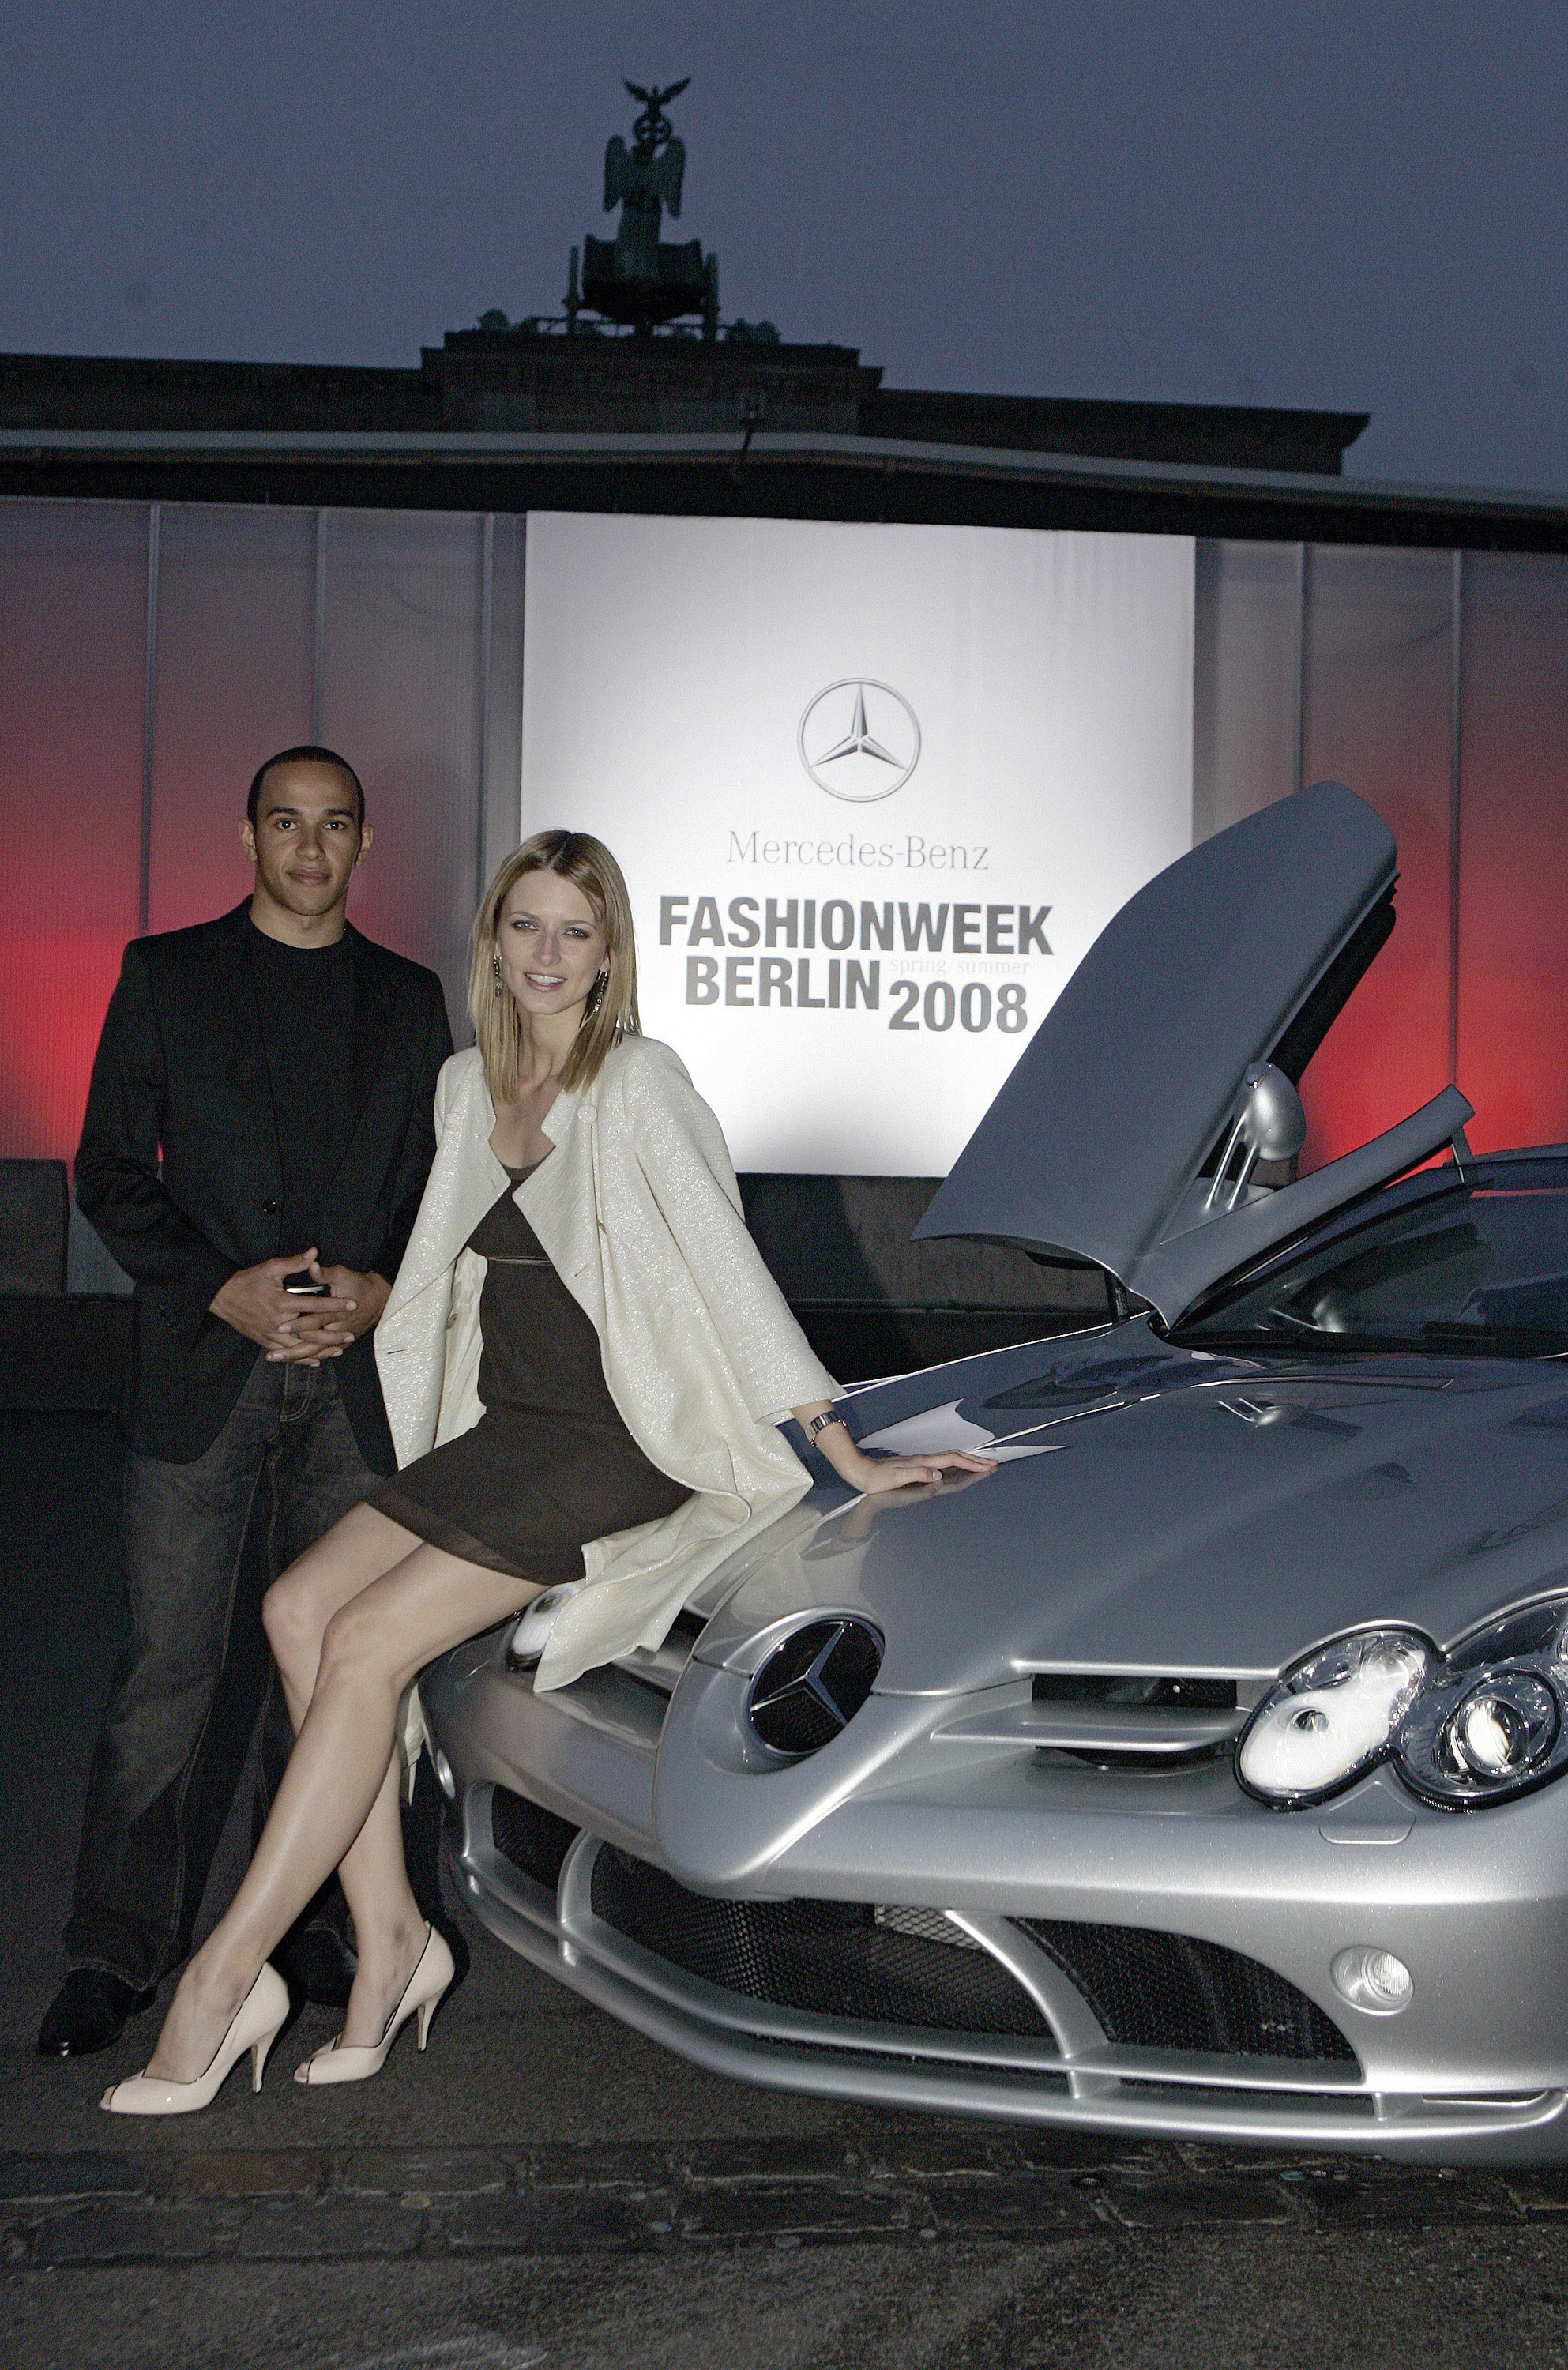 Mercedes-Benz and Fashion